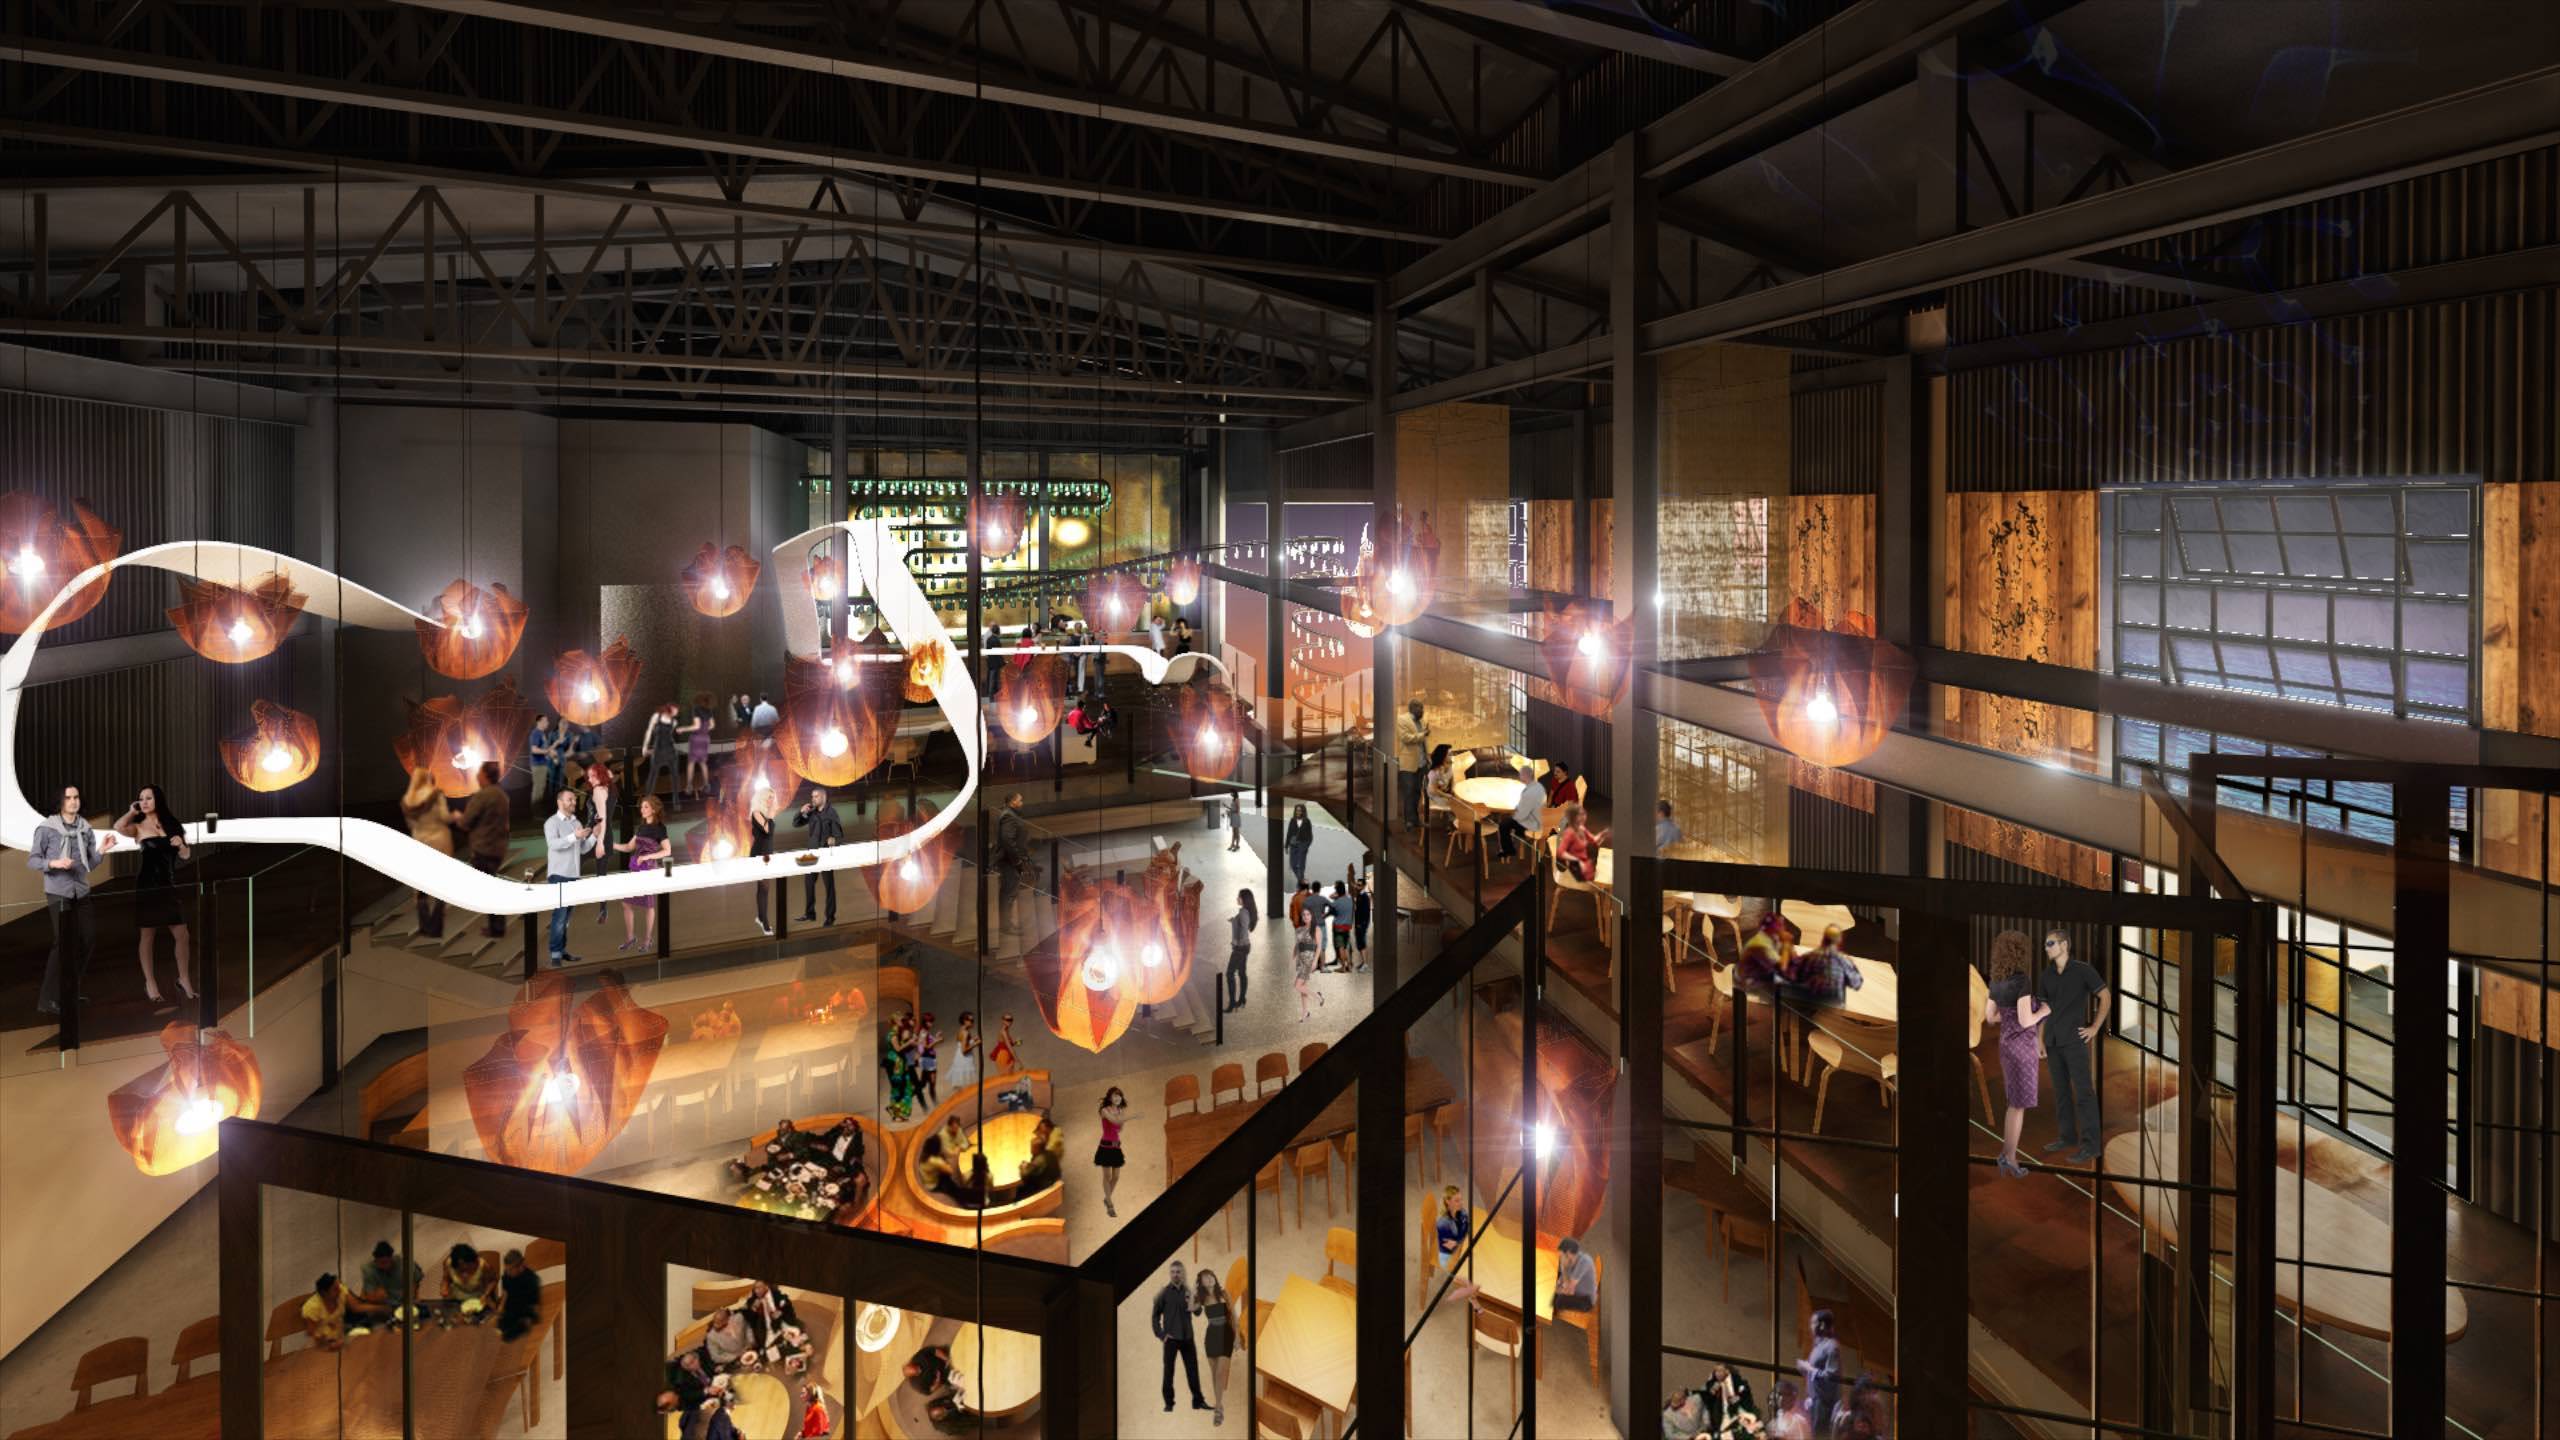 Morimoto Asia coming to 'The Landing' district of Disney Springs in 2015